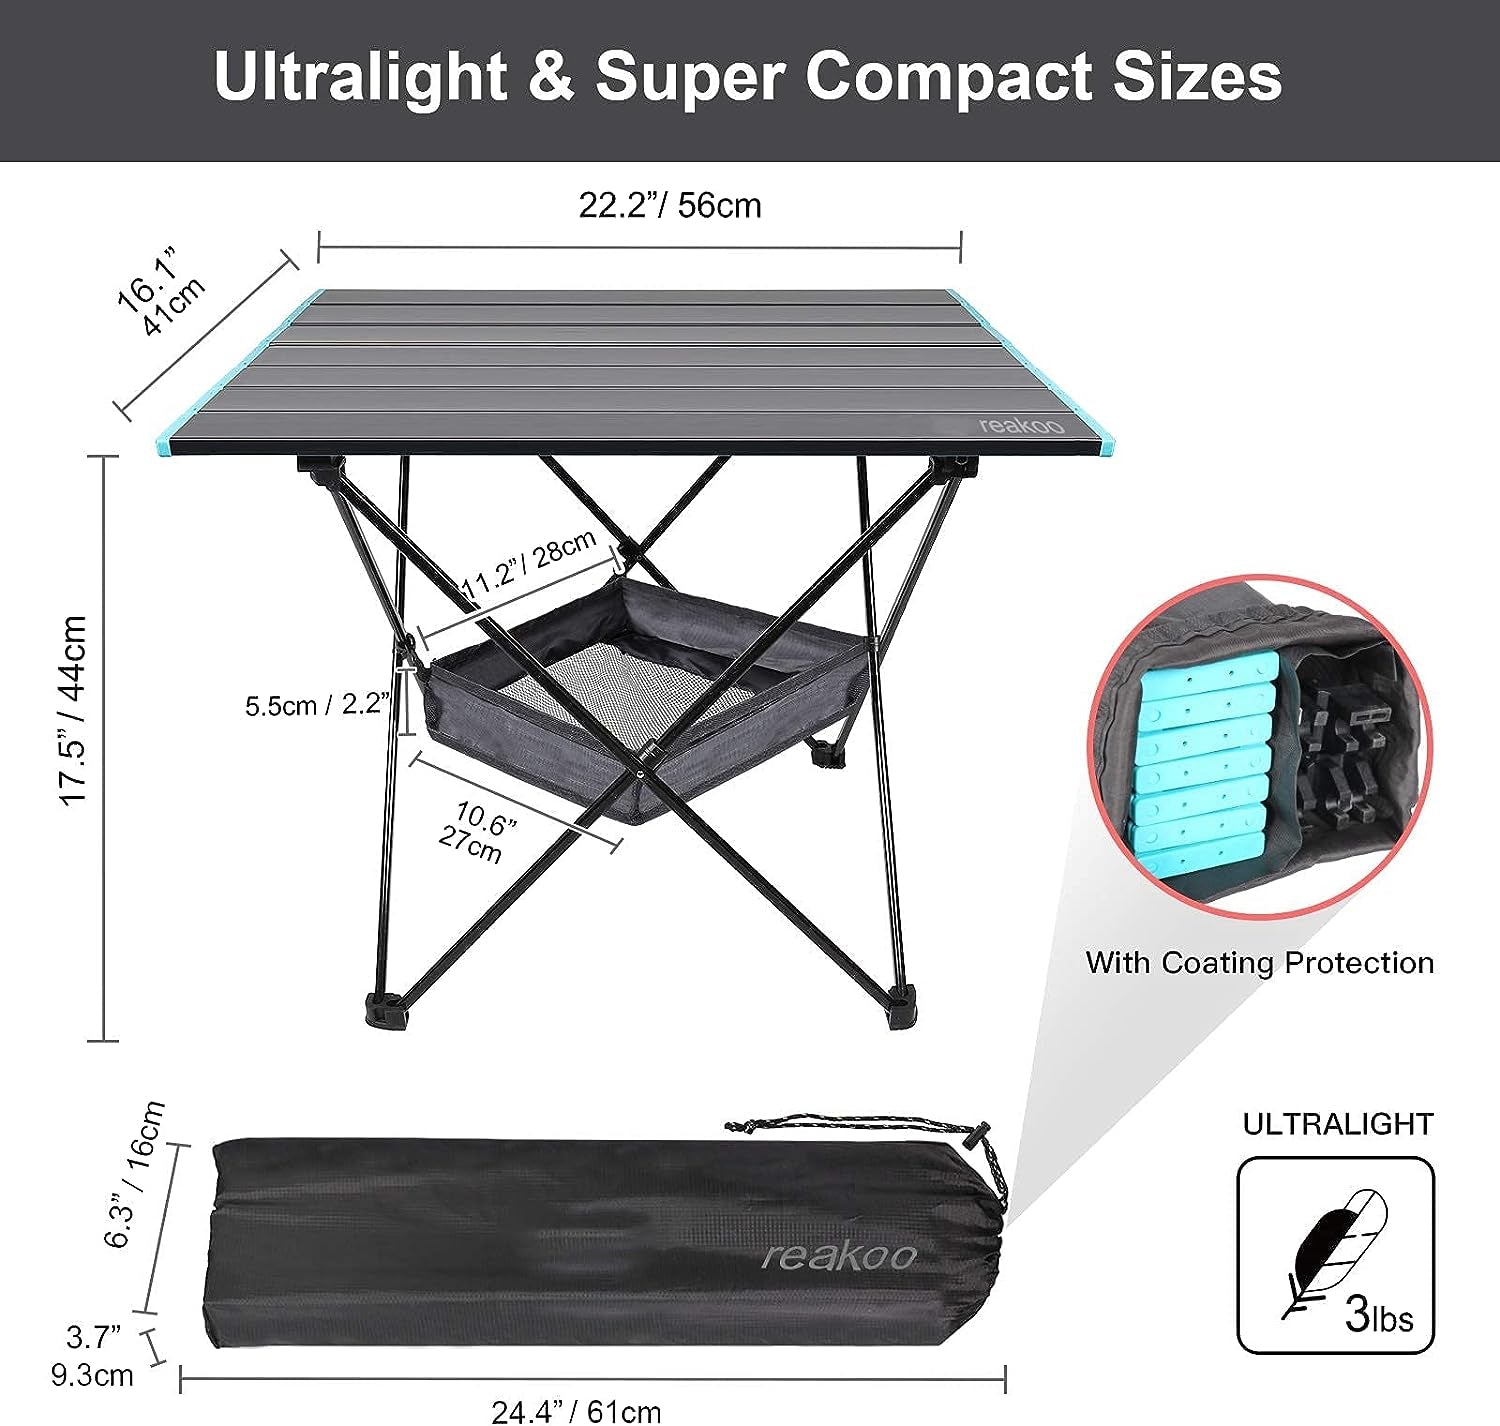  Portable Camping Table: Lightweight Aluminum Tabletop with Carry Bag for Outdoor, BBQ, Picnic, Cooking, Hiking, Fishing